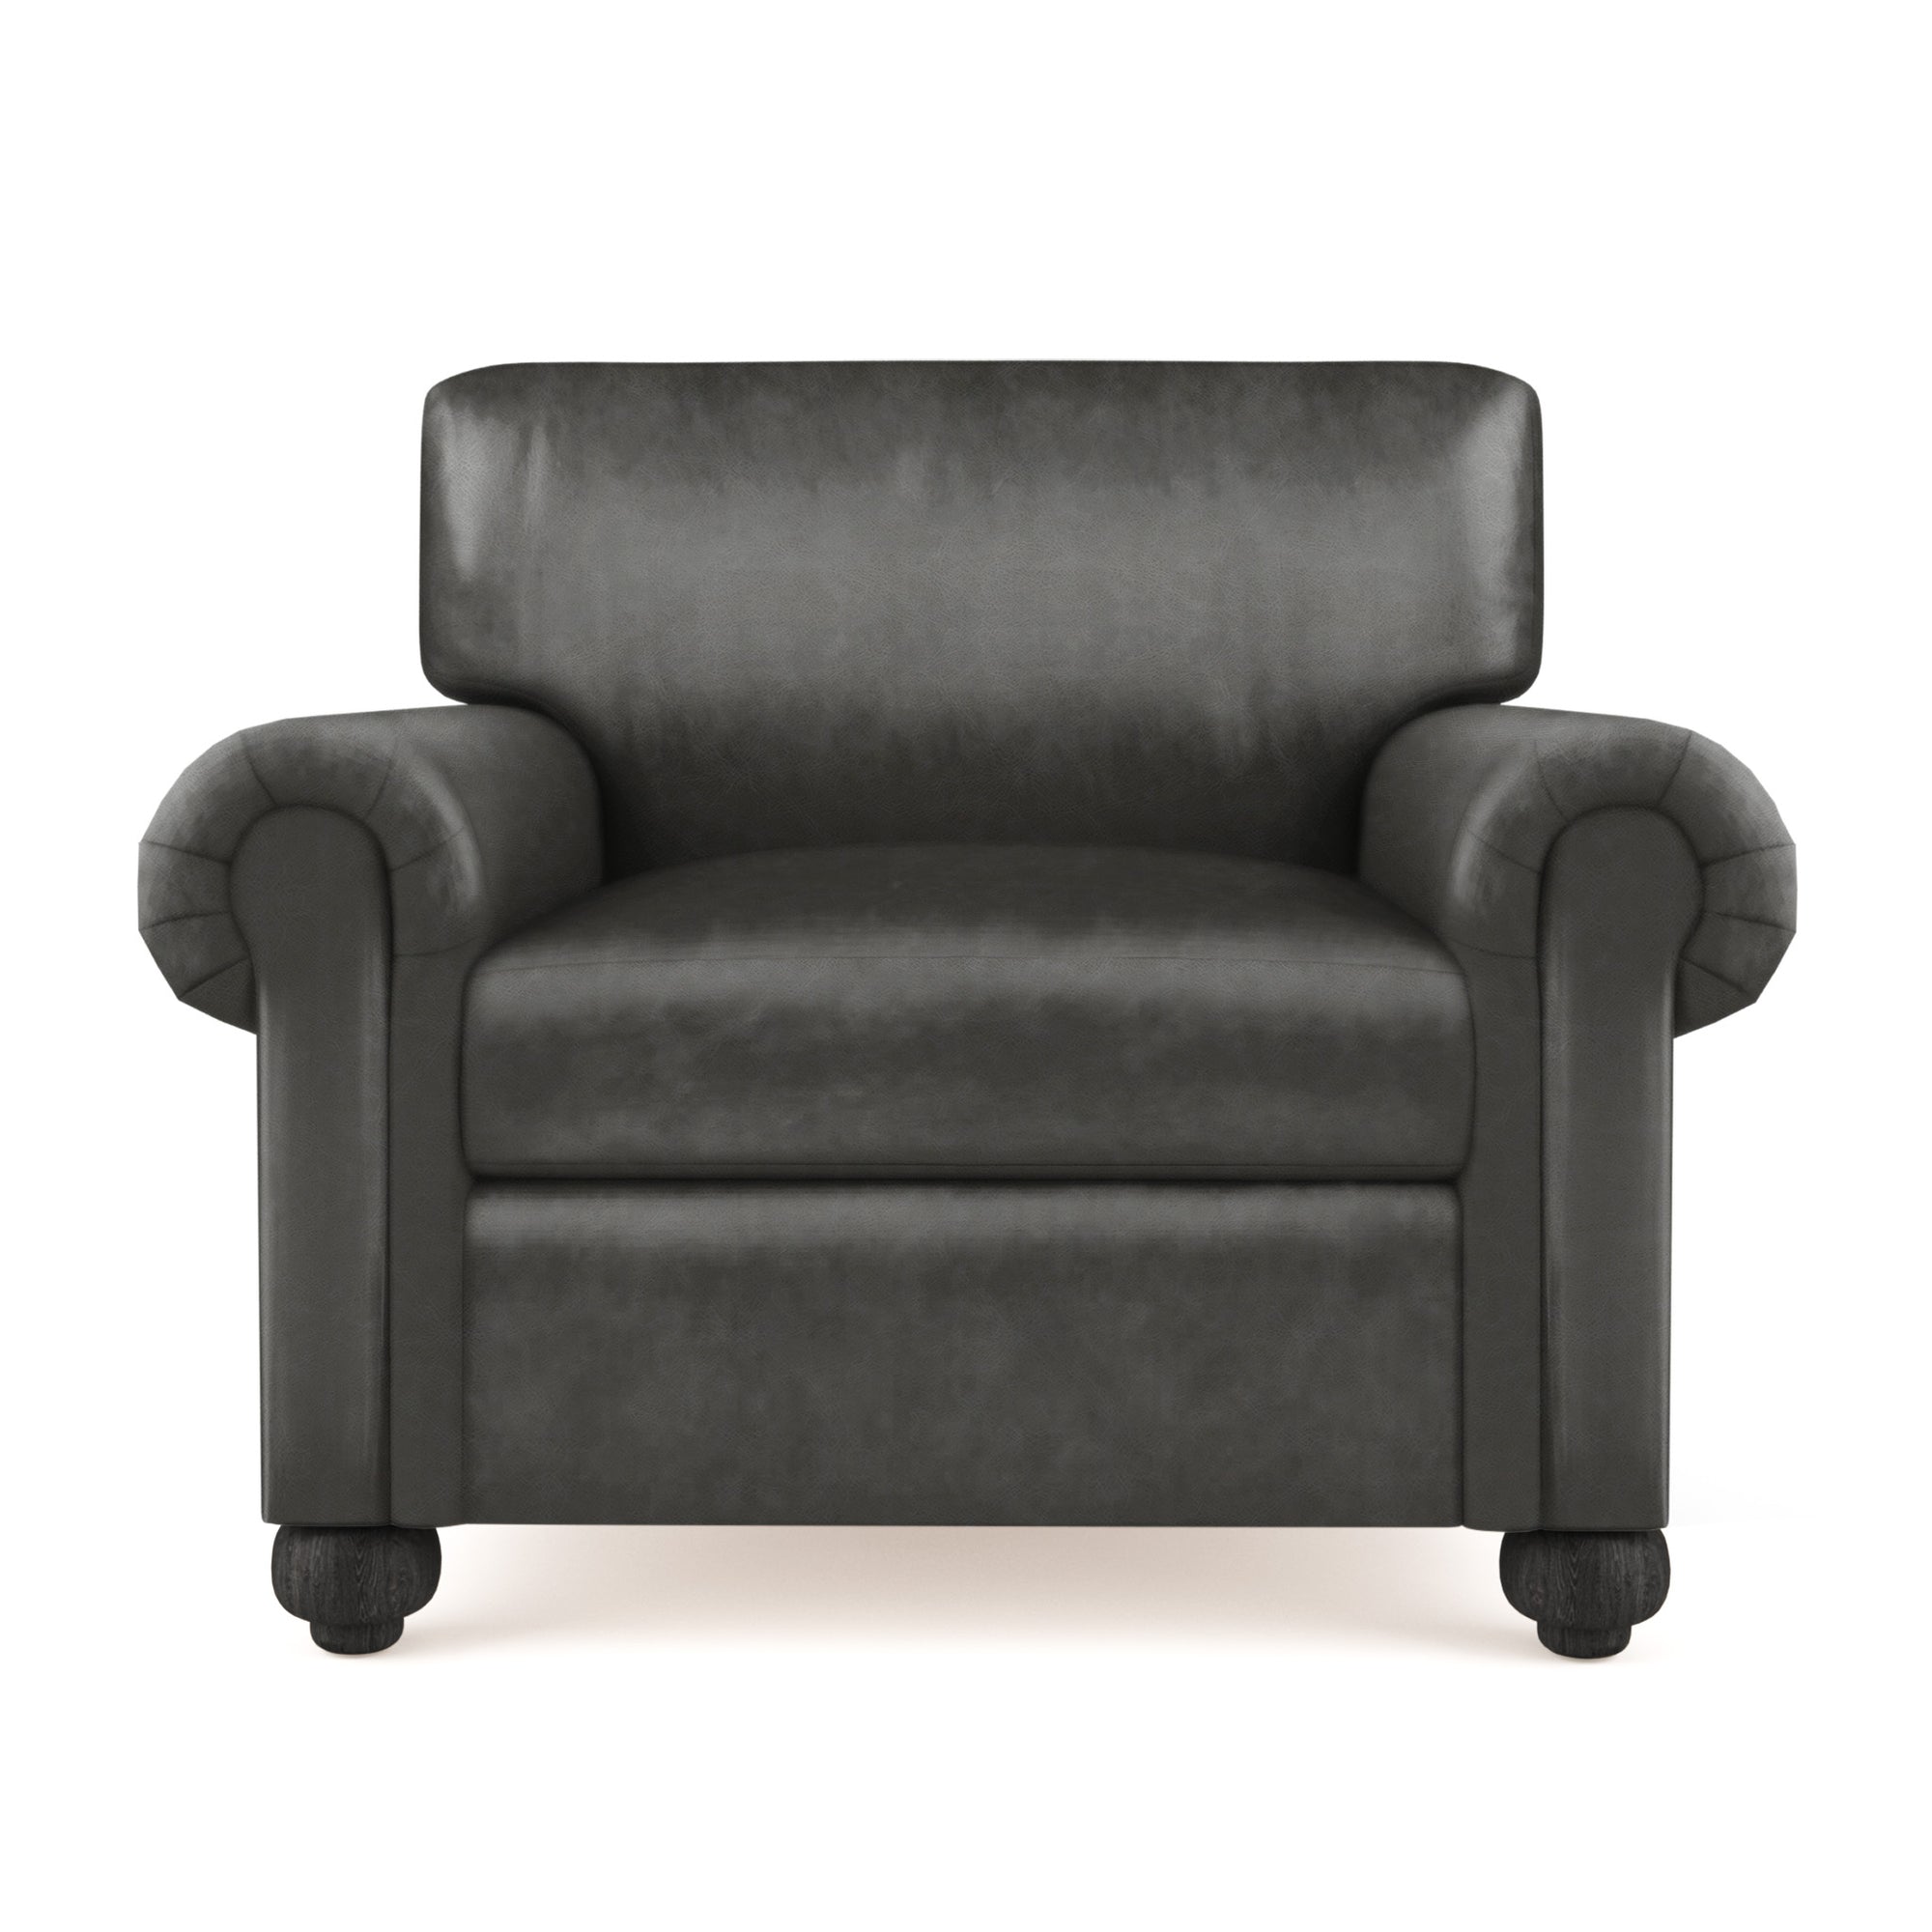 Leroy Chair - Graphite Vintage Leather